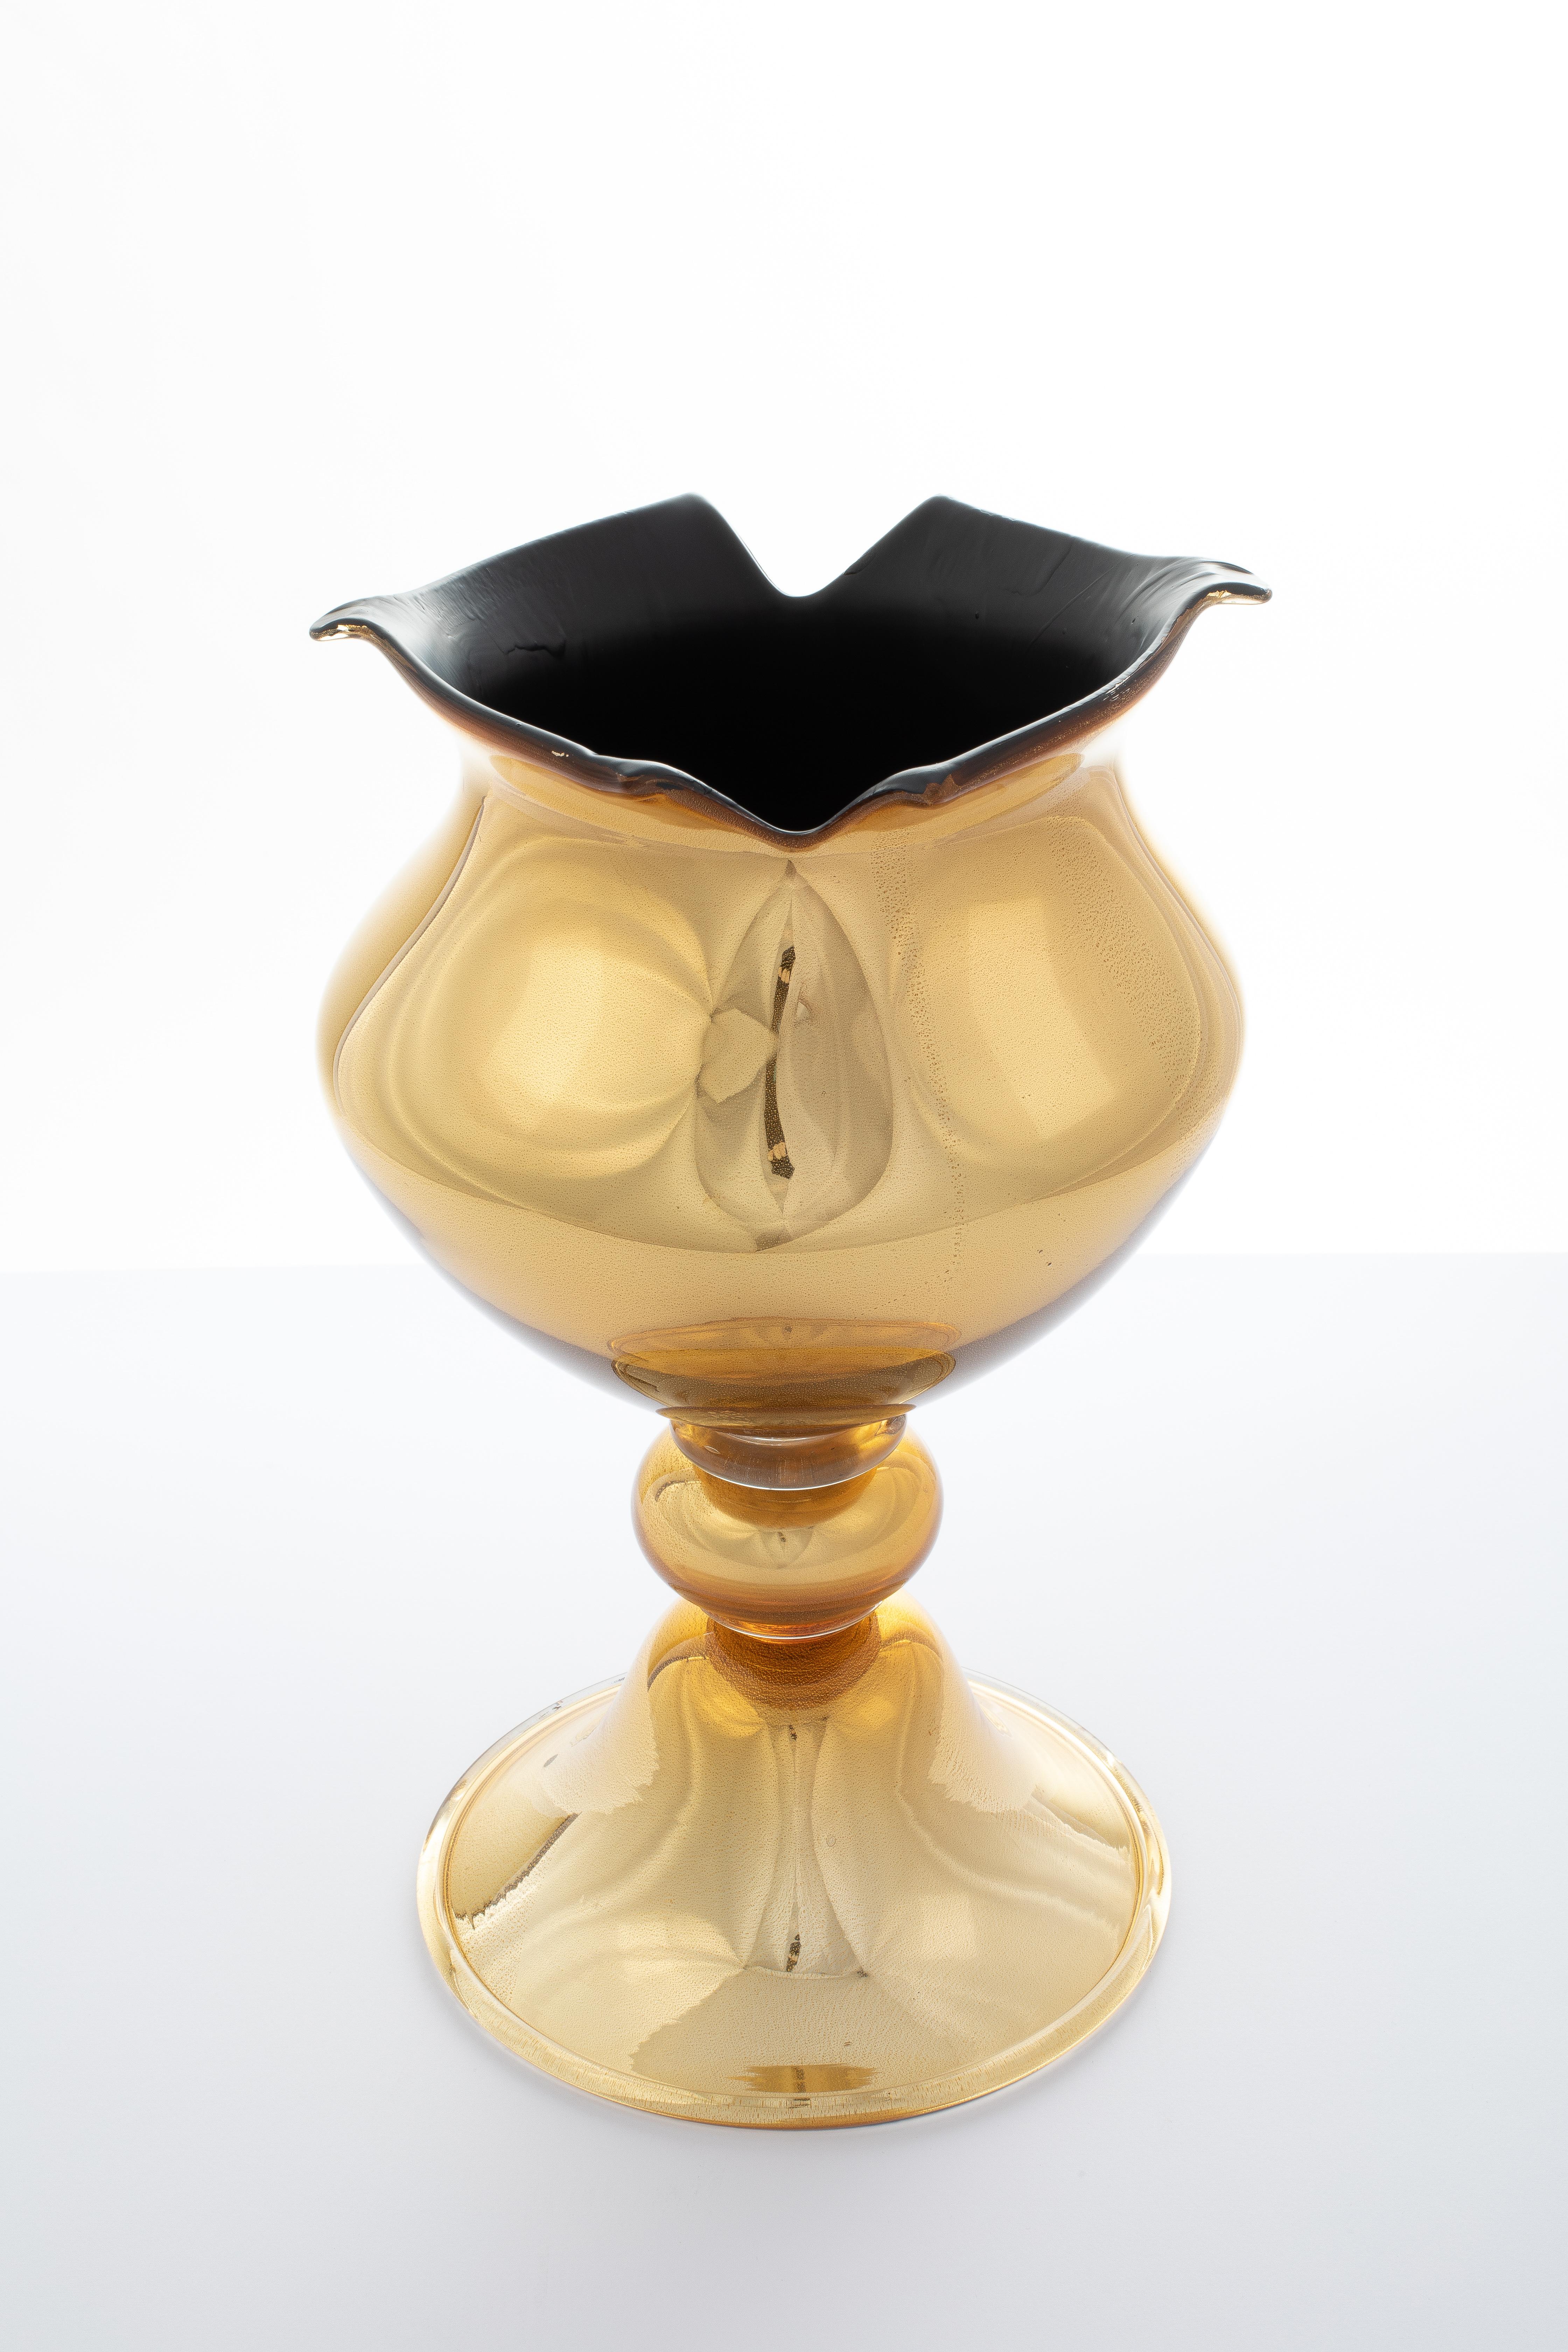 1295 Murano Hand Made Art Glass Amber Gold Mirror Volo Vase 24kt Gold Leaf In New Condition For Sale In Venice, VE